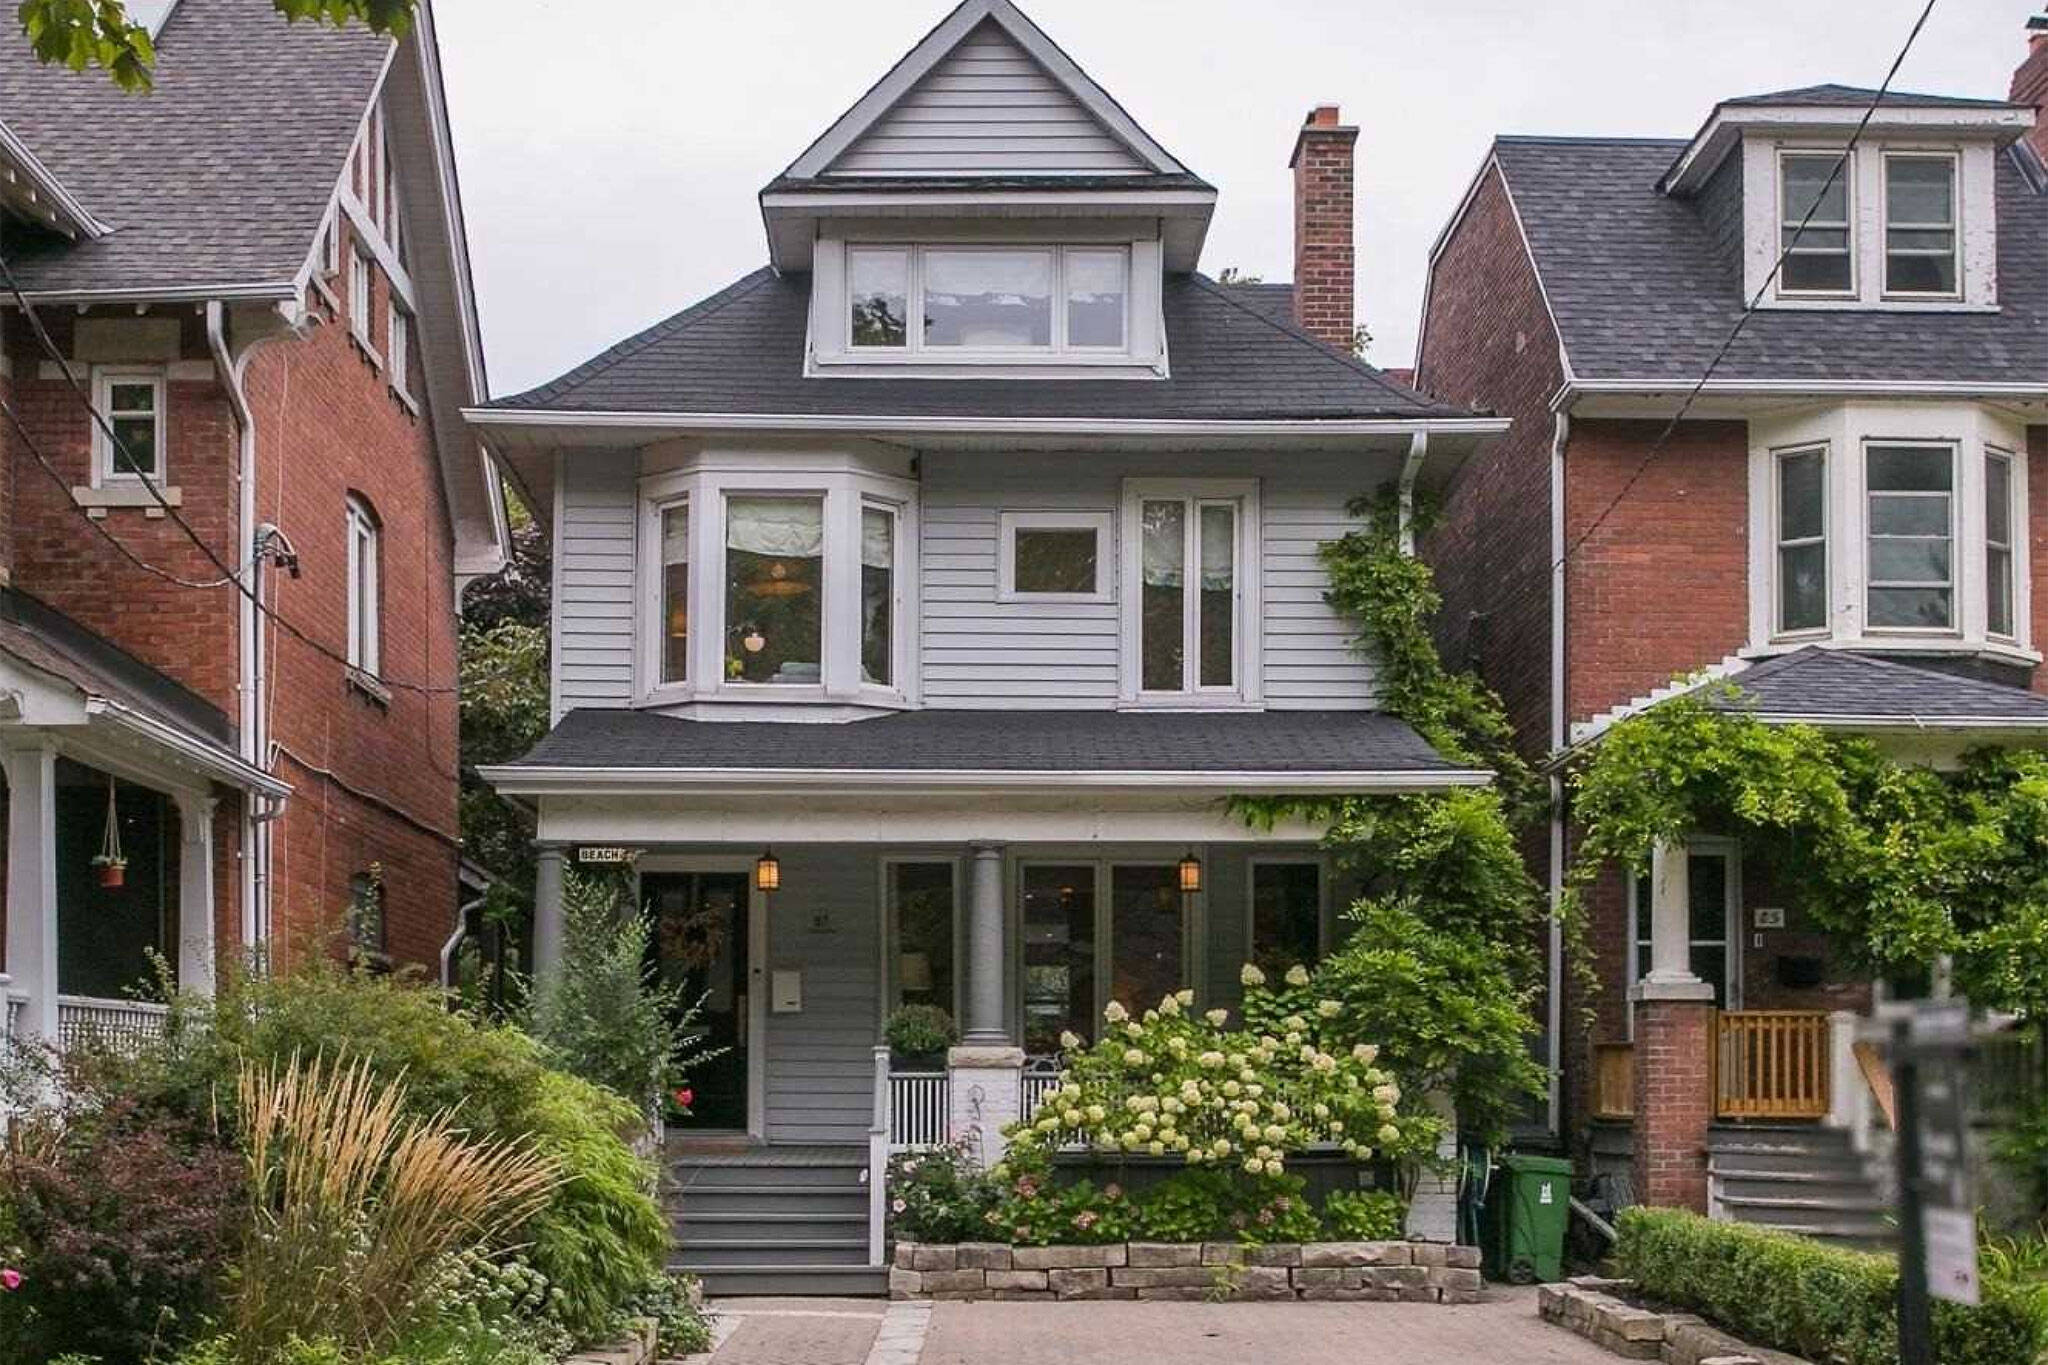 Toronto home prices just rose by the highest level in 2 years